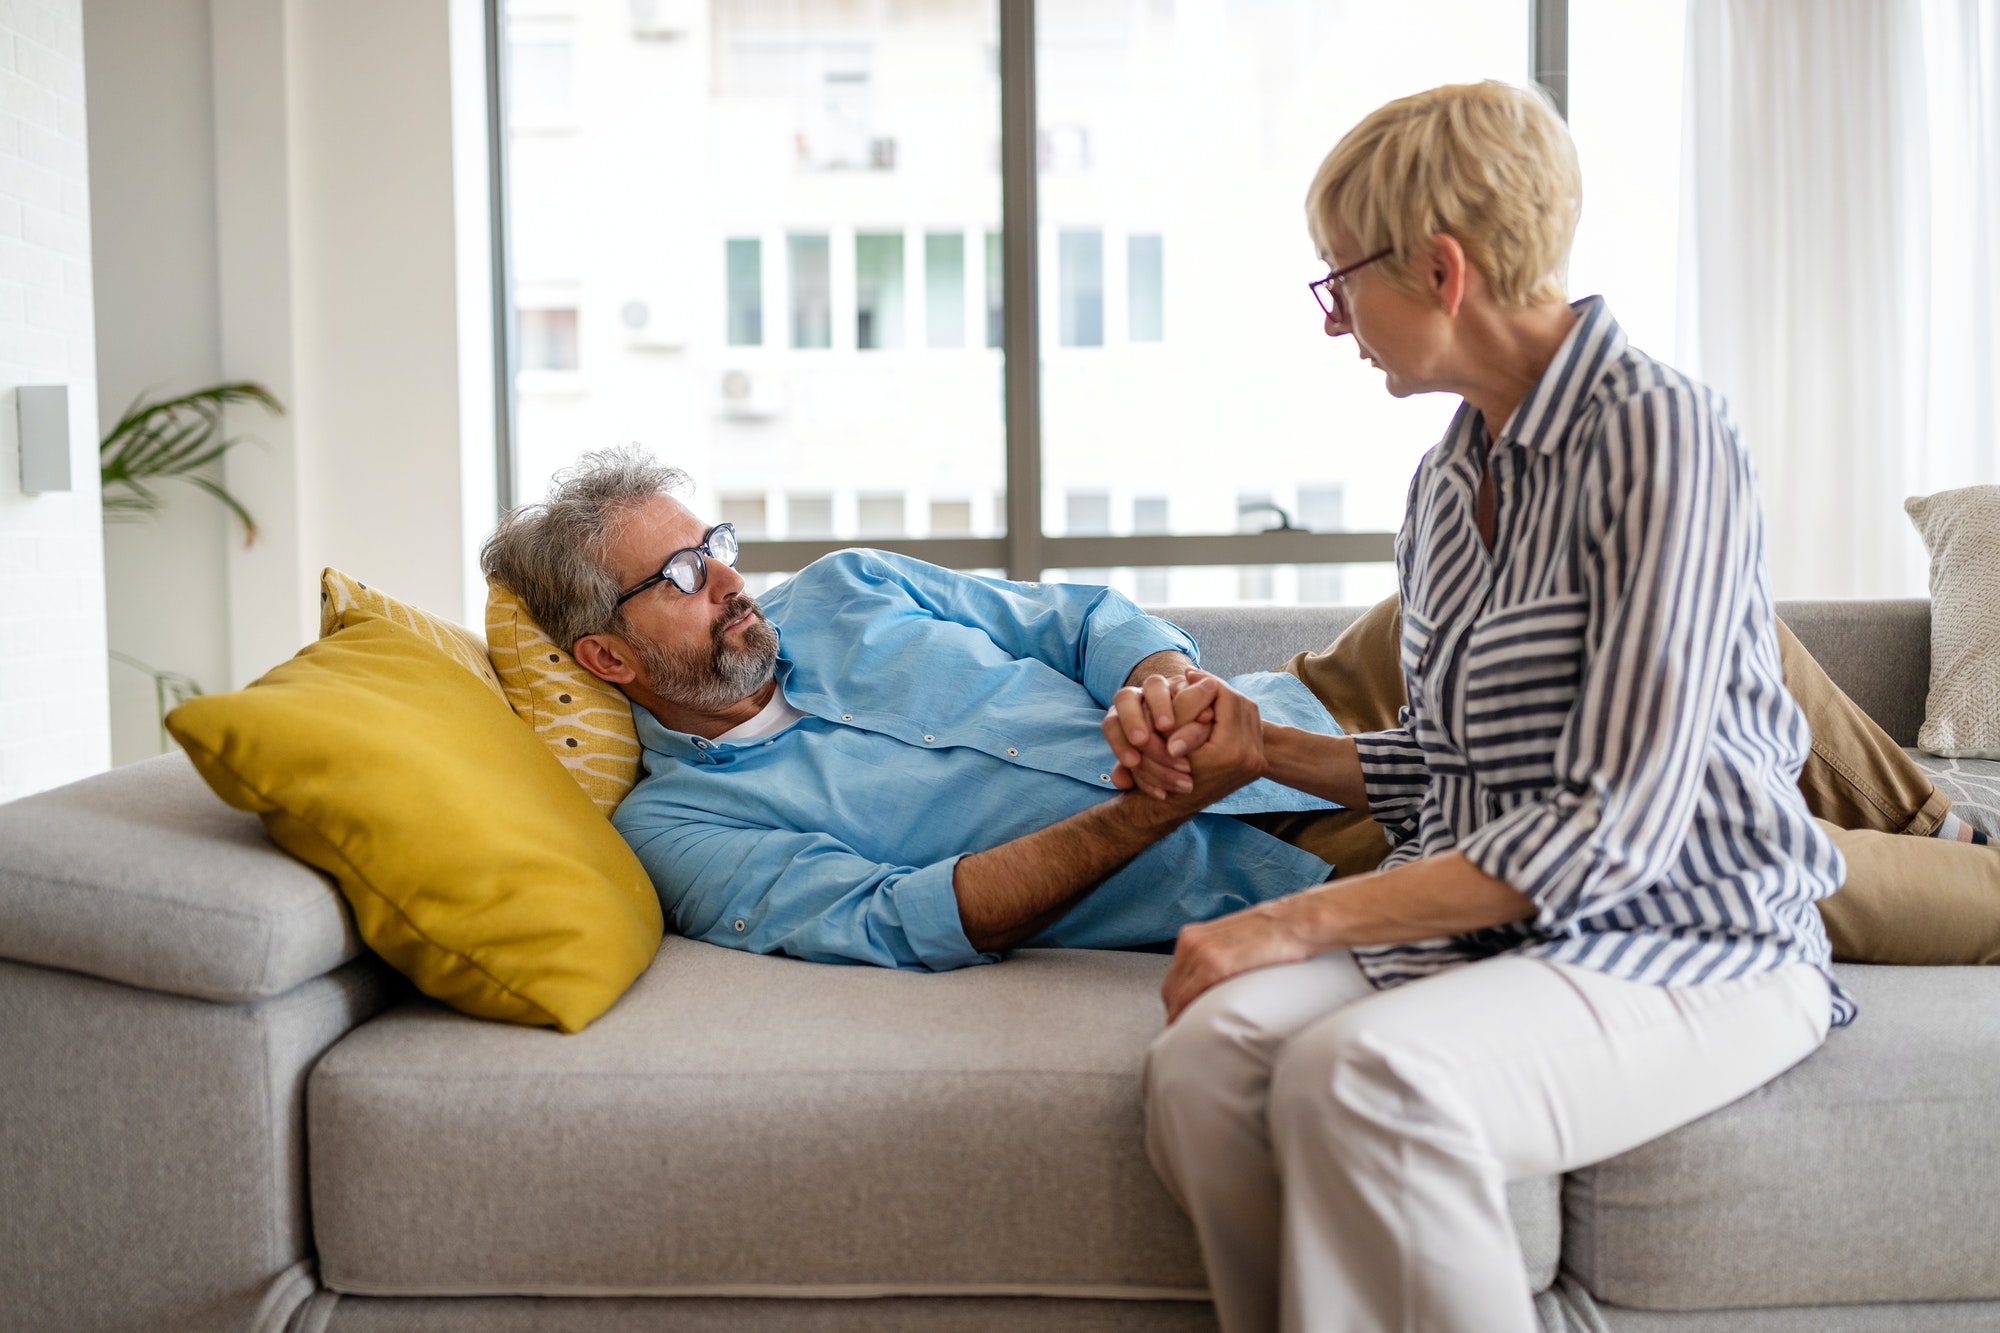 Senior woman comforting man with depression, health problem, stress at home